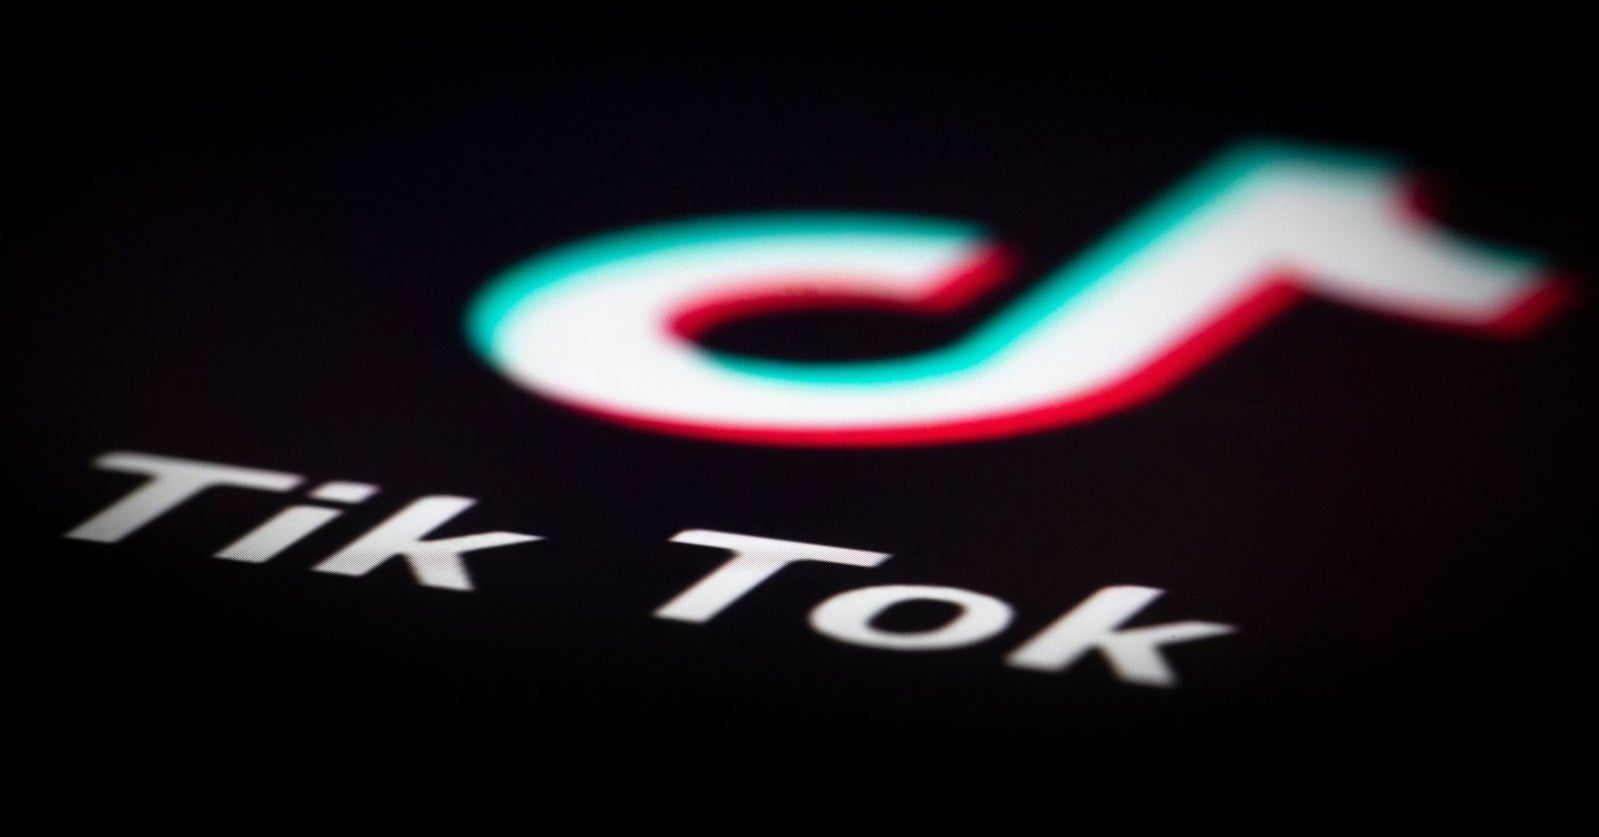 Tiktok Users Say Their Accounts Are Being Deleted With No Warning After New Policy